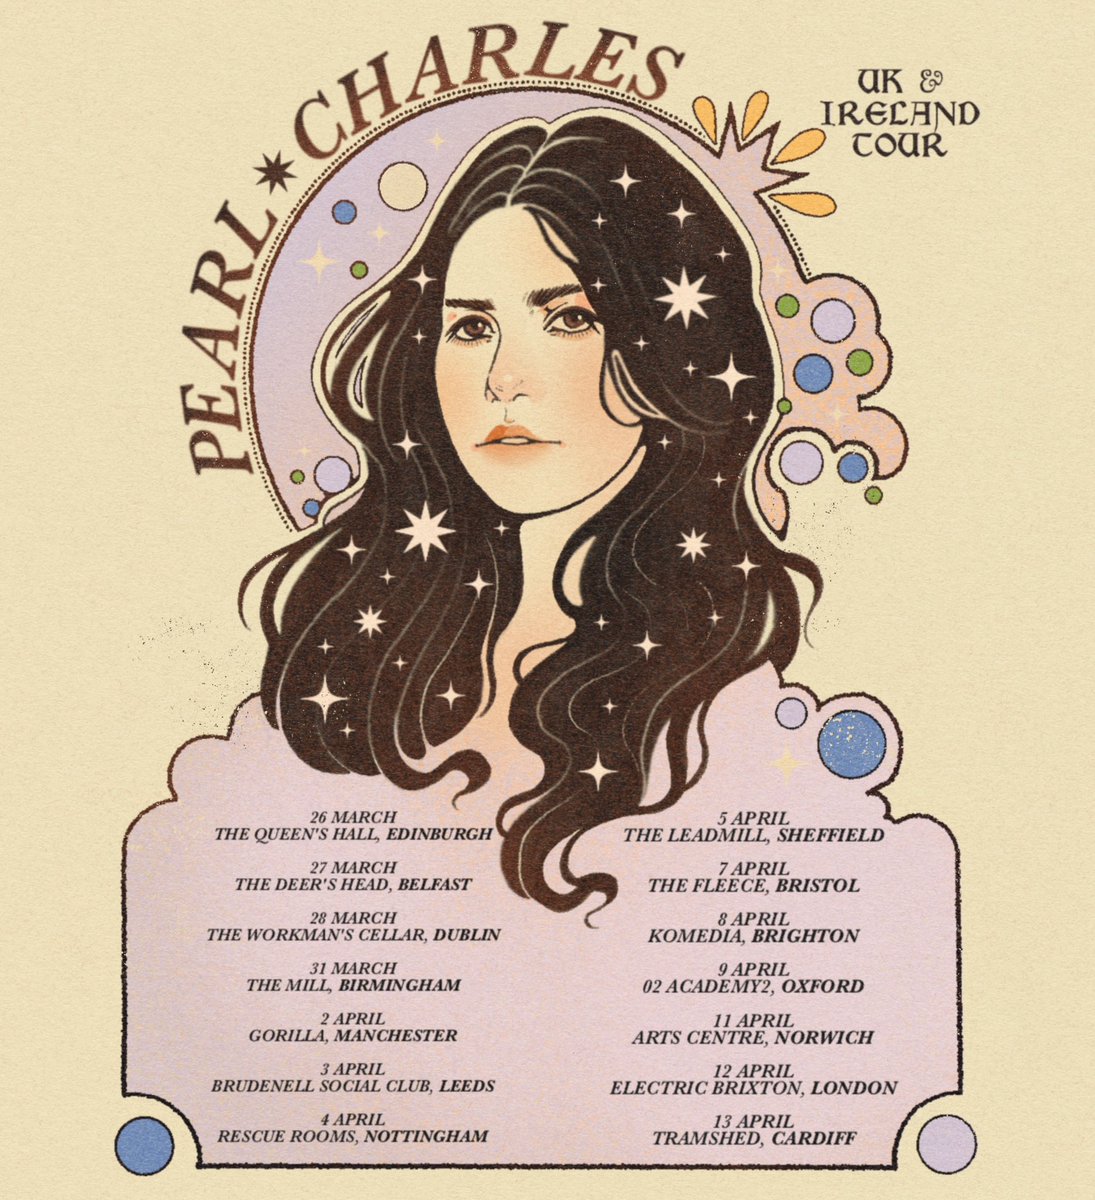 ✨UK & IE! ✨We are coming way next year supporting our dear friends @thewanderhearts in March & April, do you have your tickets yet? They’re going fast! Poster by the dreamy Lydia Silver 💜